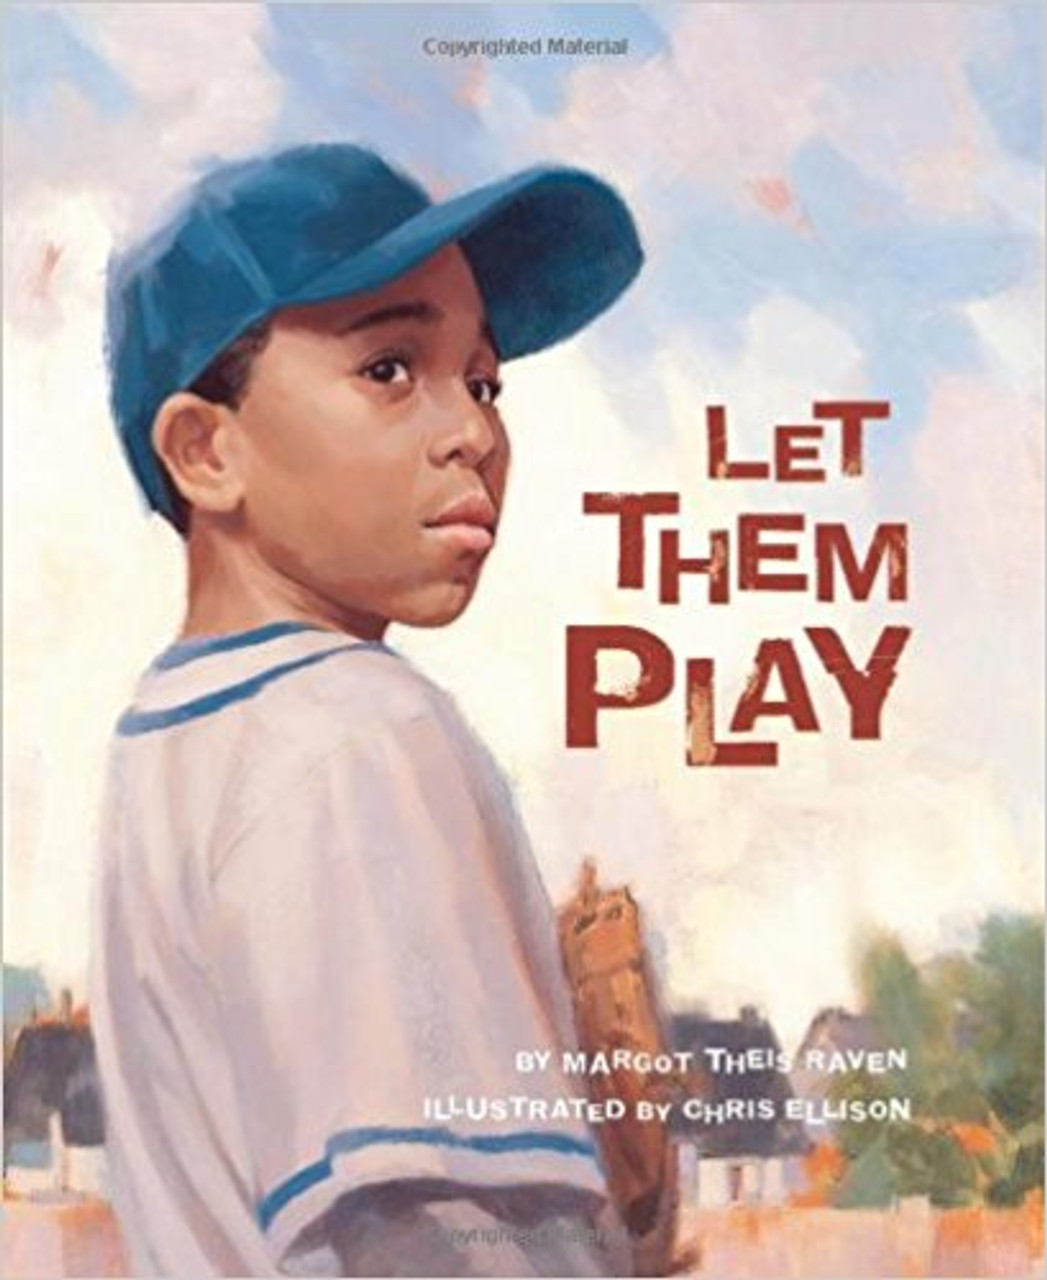 Let Them Play by Margot Theis Raven